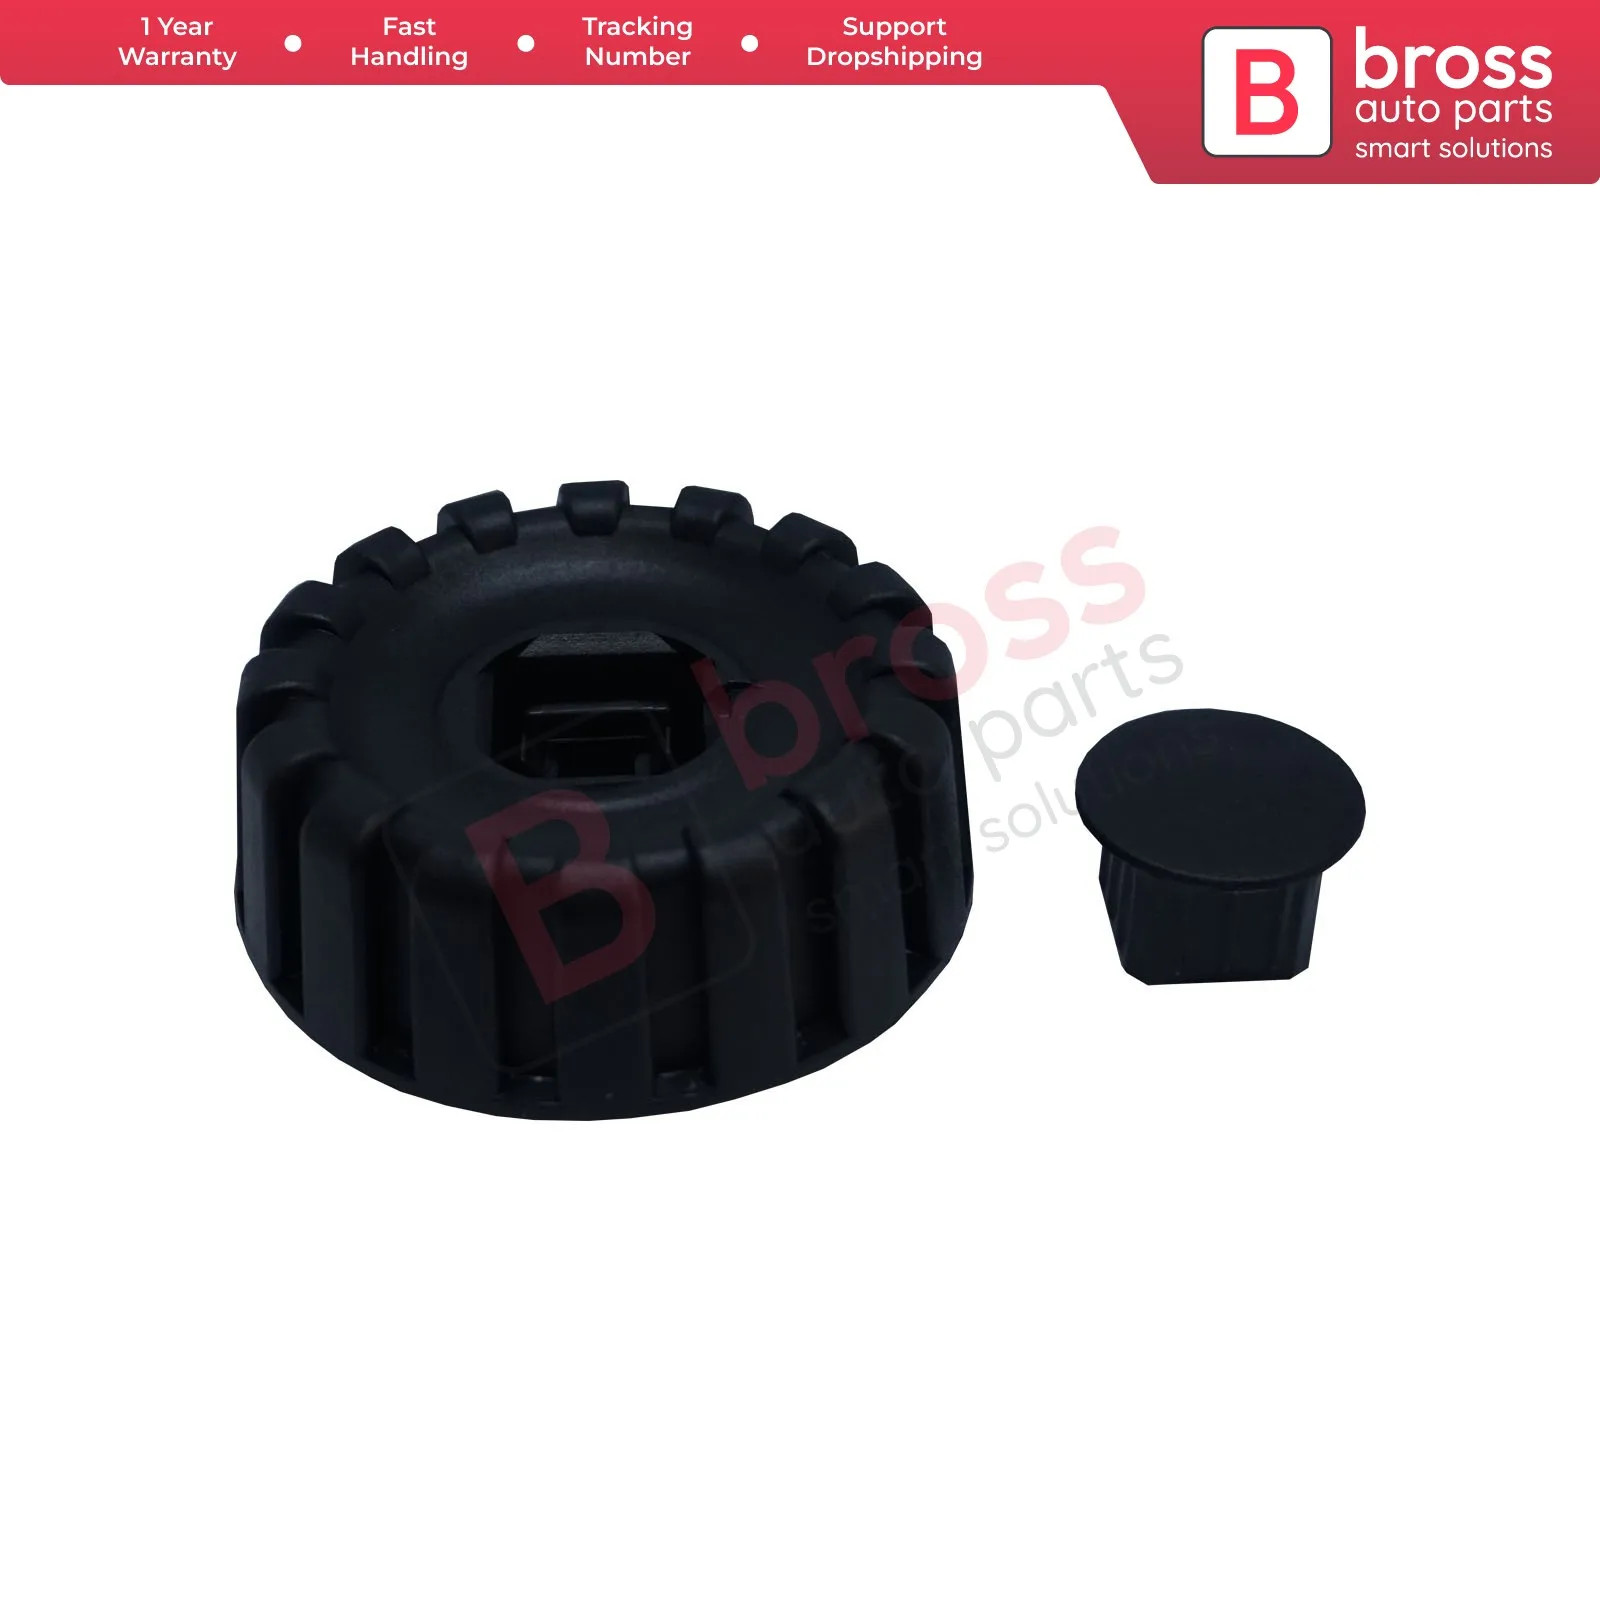 

Bross Auto Parts BDP782 Seat Adjuster Handle 7701203023 Left or Right Seat for Clio MK1 1990-1998, 19 1988–1996, 21 1986–1994